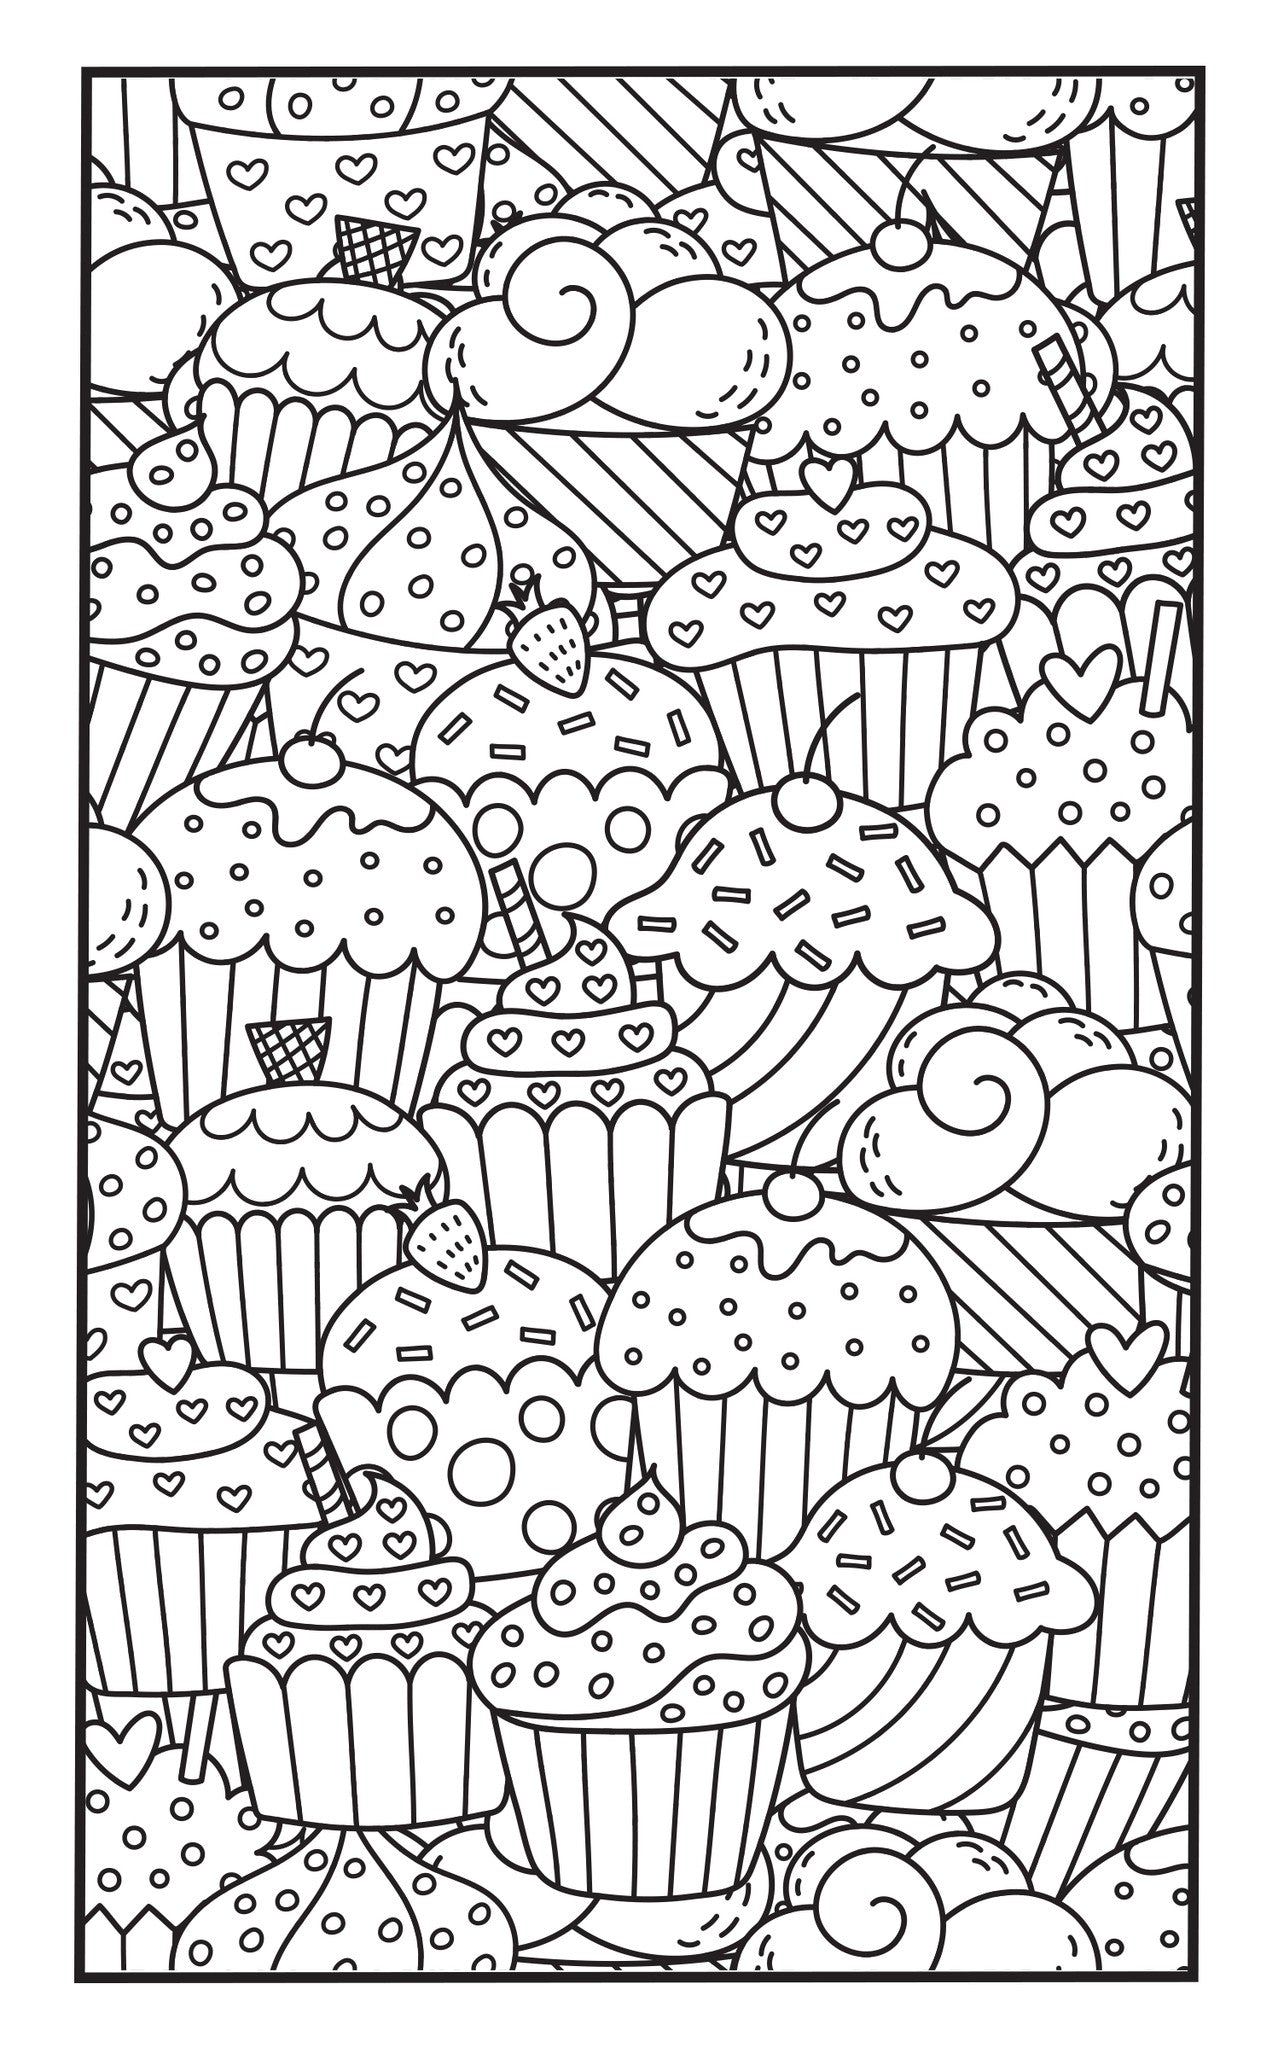 Coloring book set, Haunted house coloring page, Coloring pages